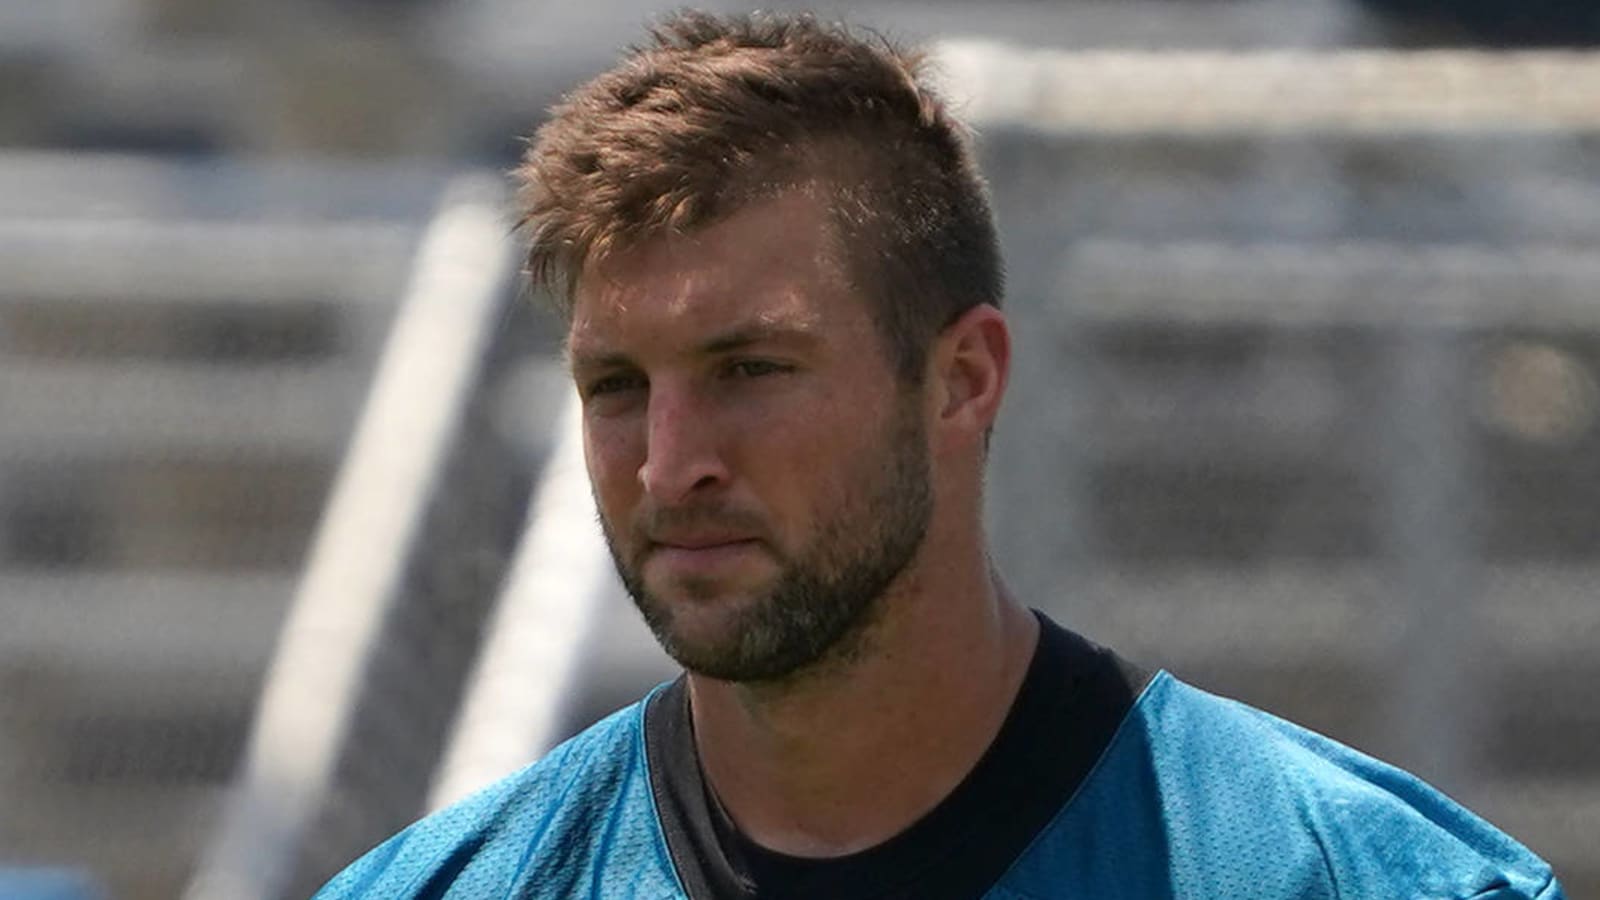 Coaches have one common complaint about Tim Tebow amid NFL return